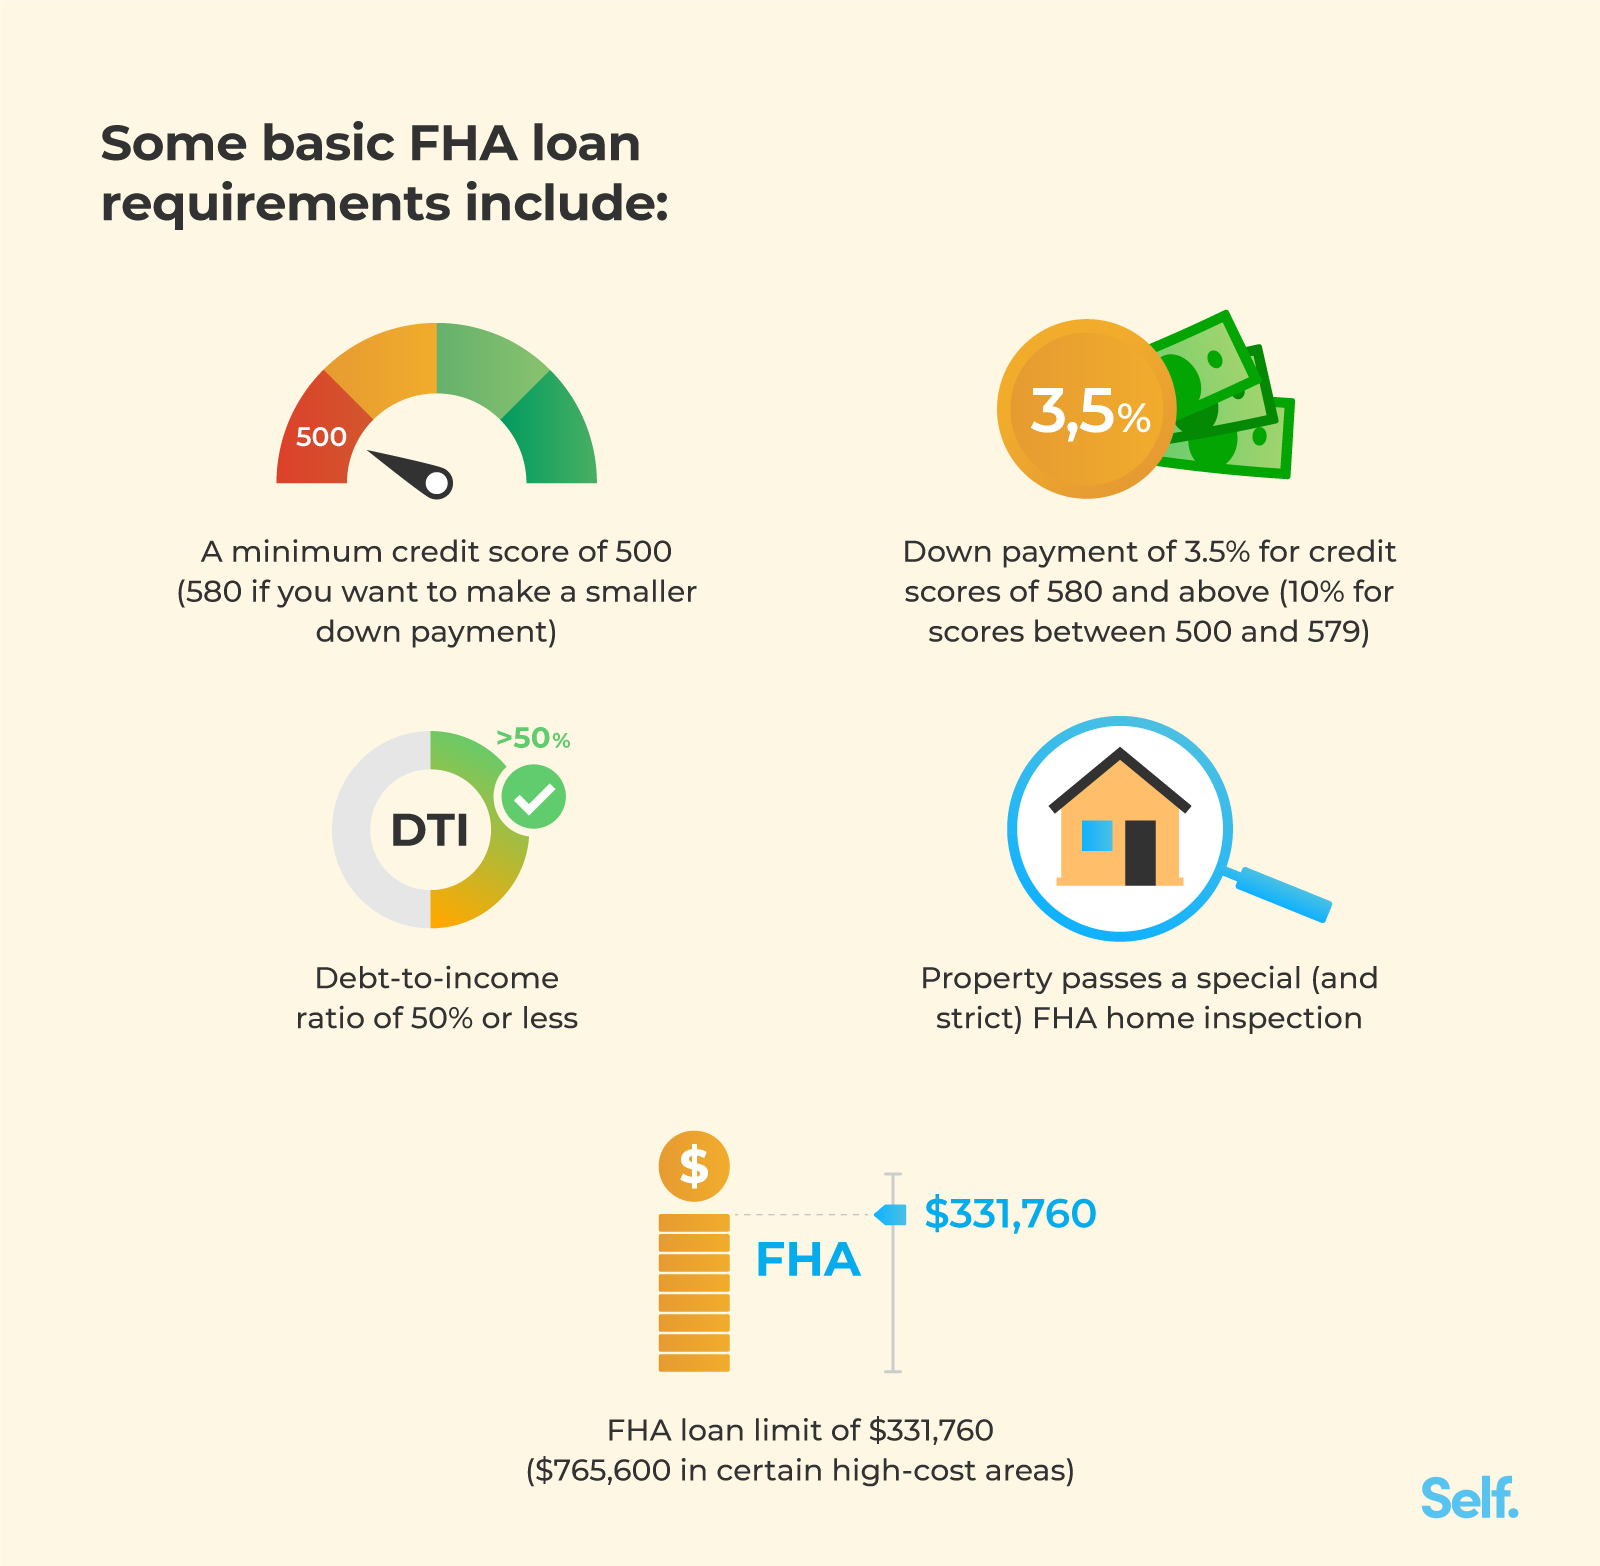 03-Some-basic-FHA-loan-requirements